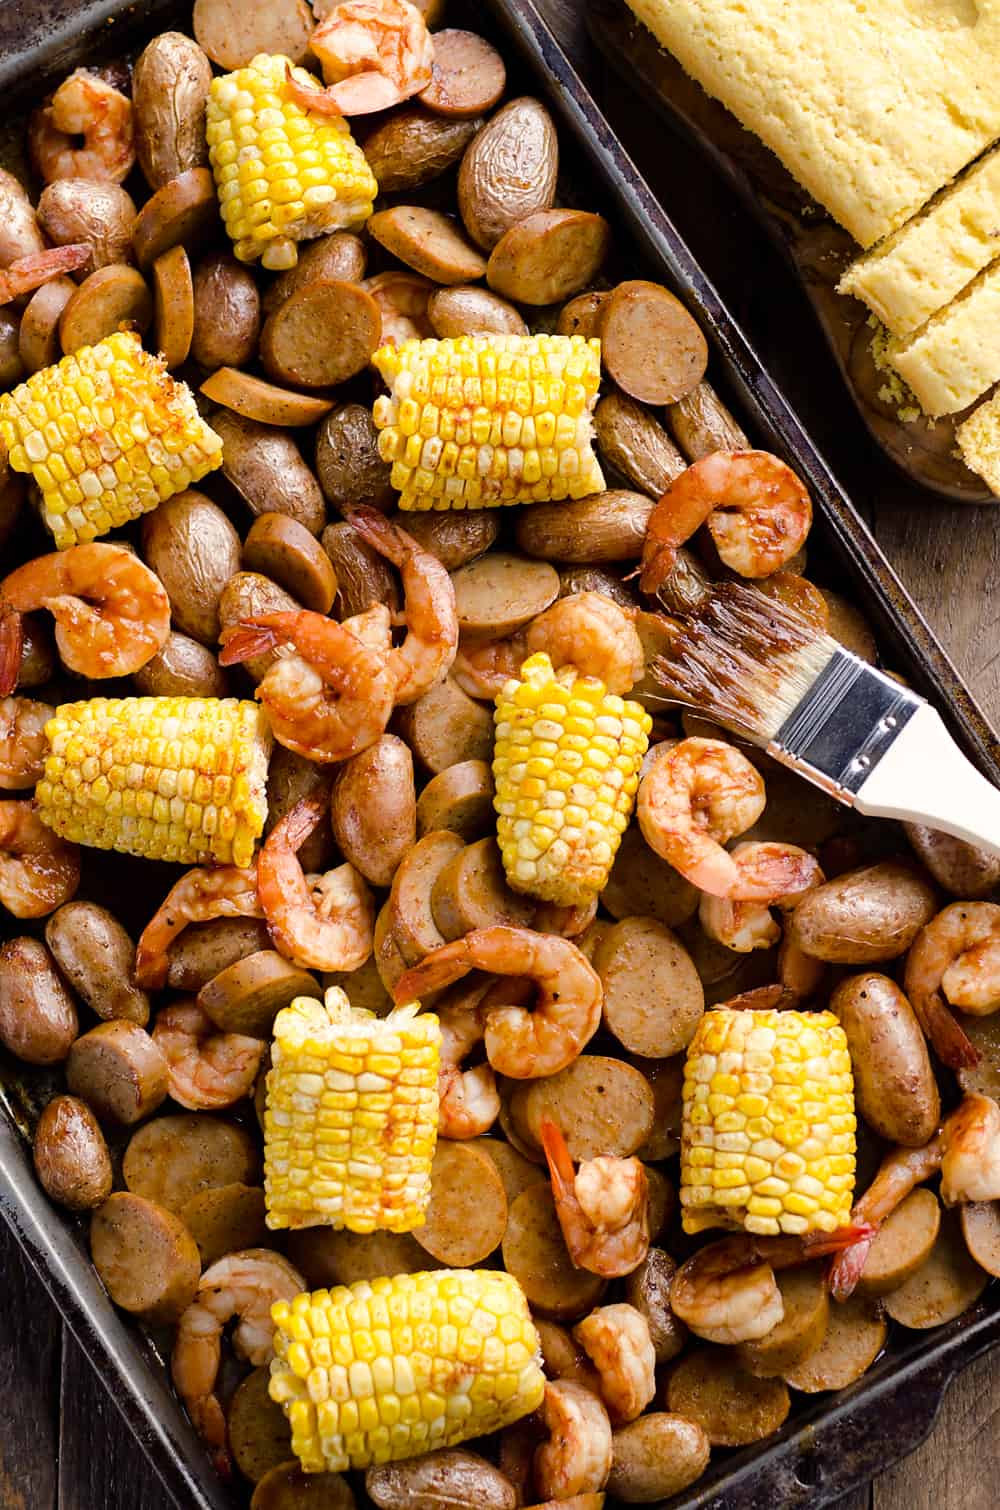 BBQ Shrimp & Sausage Sheet Pan Dinner is an easy and wholesome recipe perfect for a weeknight family dinner. Roasted sweet corn and potatoes are paired with BBQ shrimp and Gold'n Plump Hickory Smoked Sliced Chicken Sausage for a comforting low-fat meal!